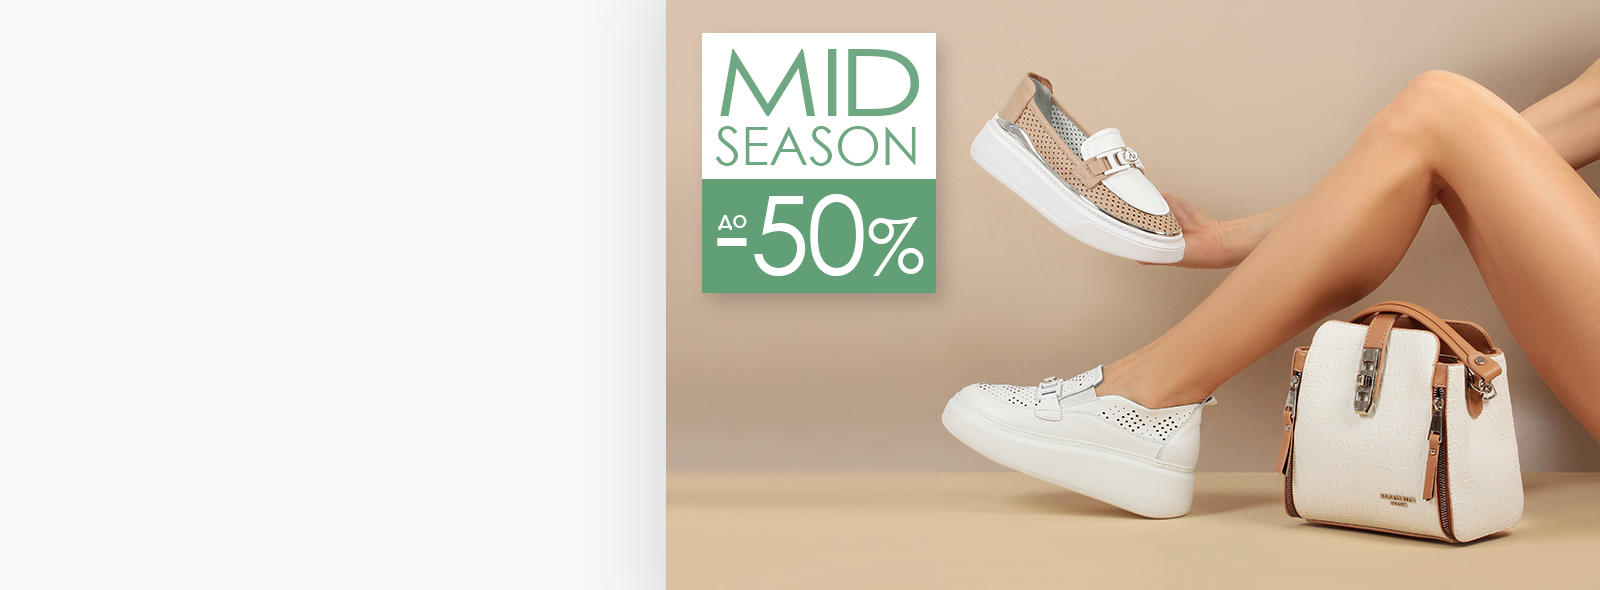 MID SEASON UP TO 50% OFF